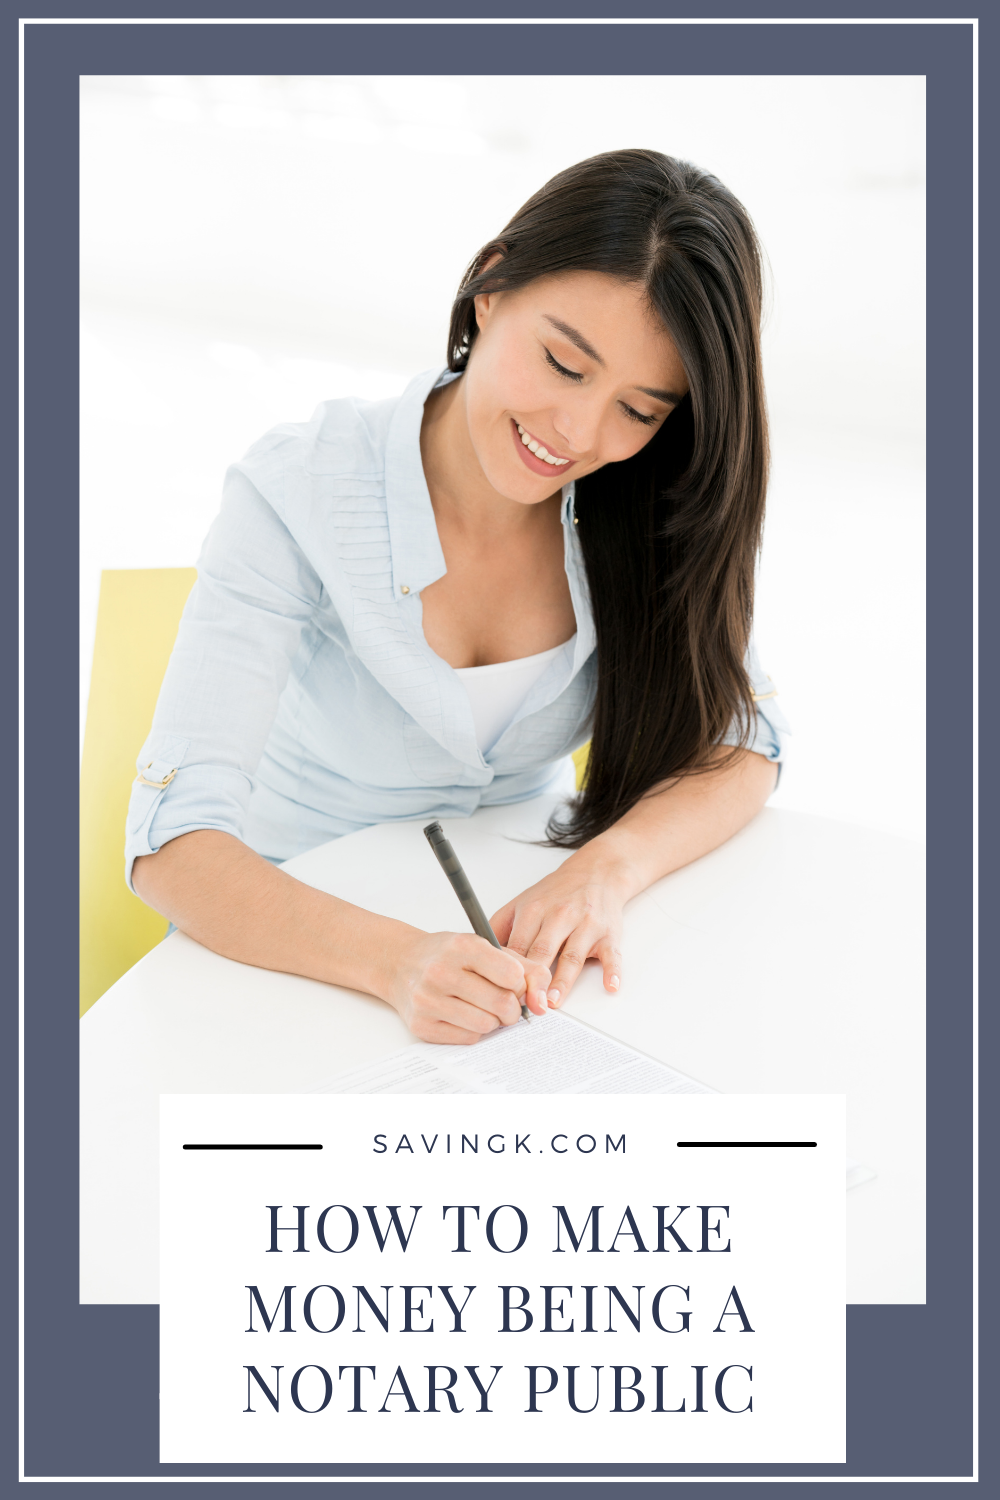 How to Become a Notary and Make Money: The Ultimate Guide